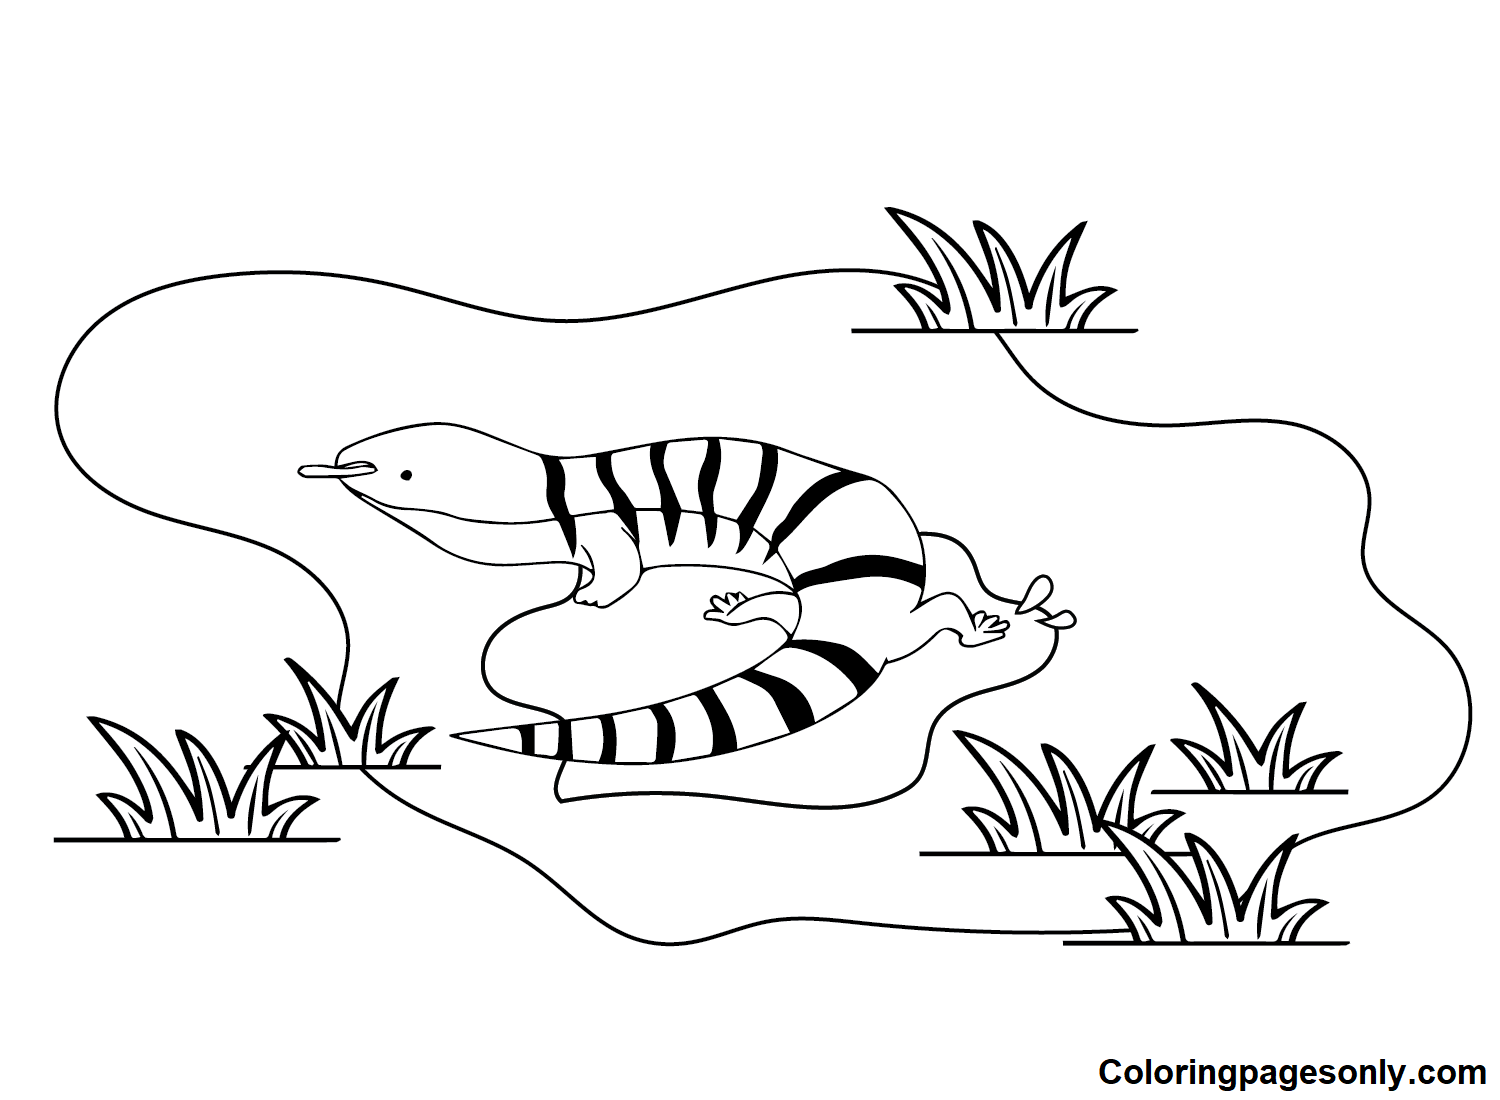 Skink color Sheets Coloring Page